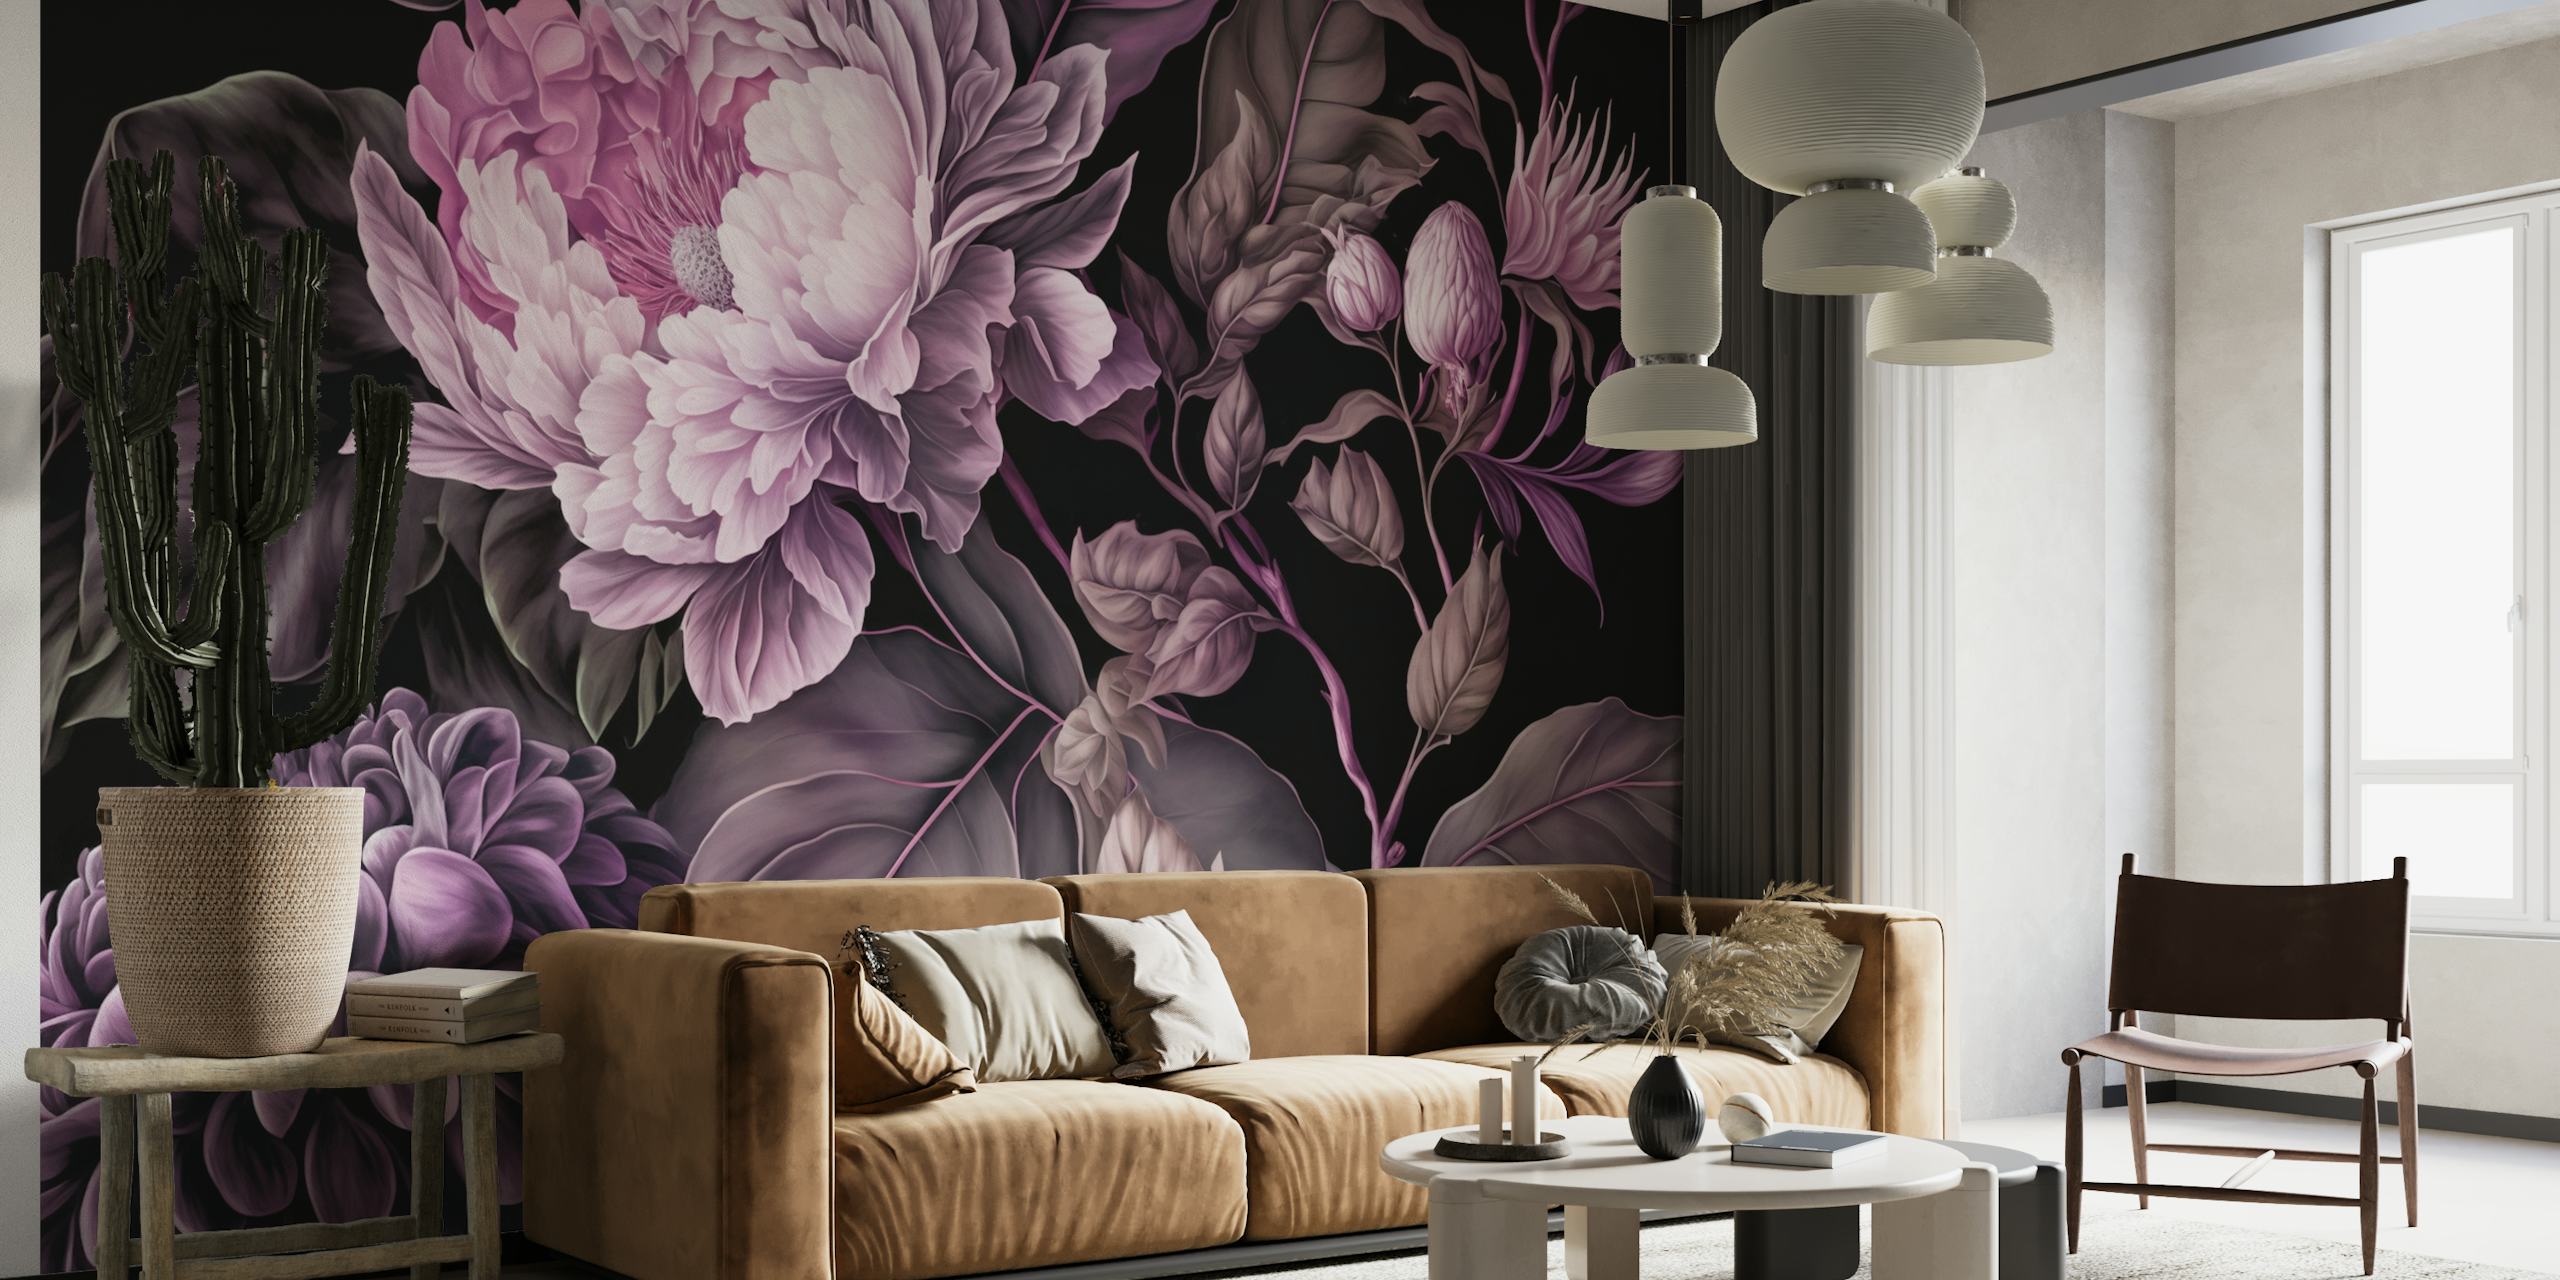 Opulent moody baroque large floral pattern wall mural for a dramatic home decor.